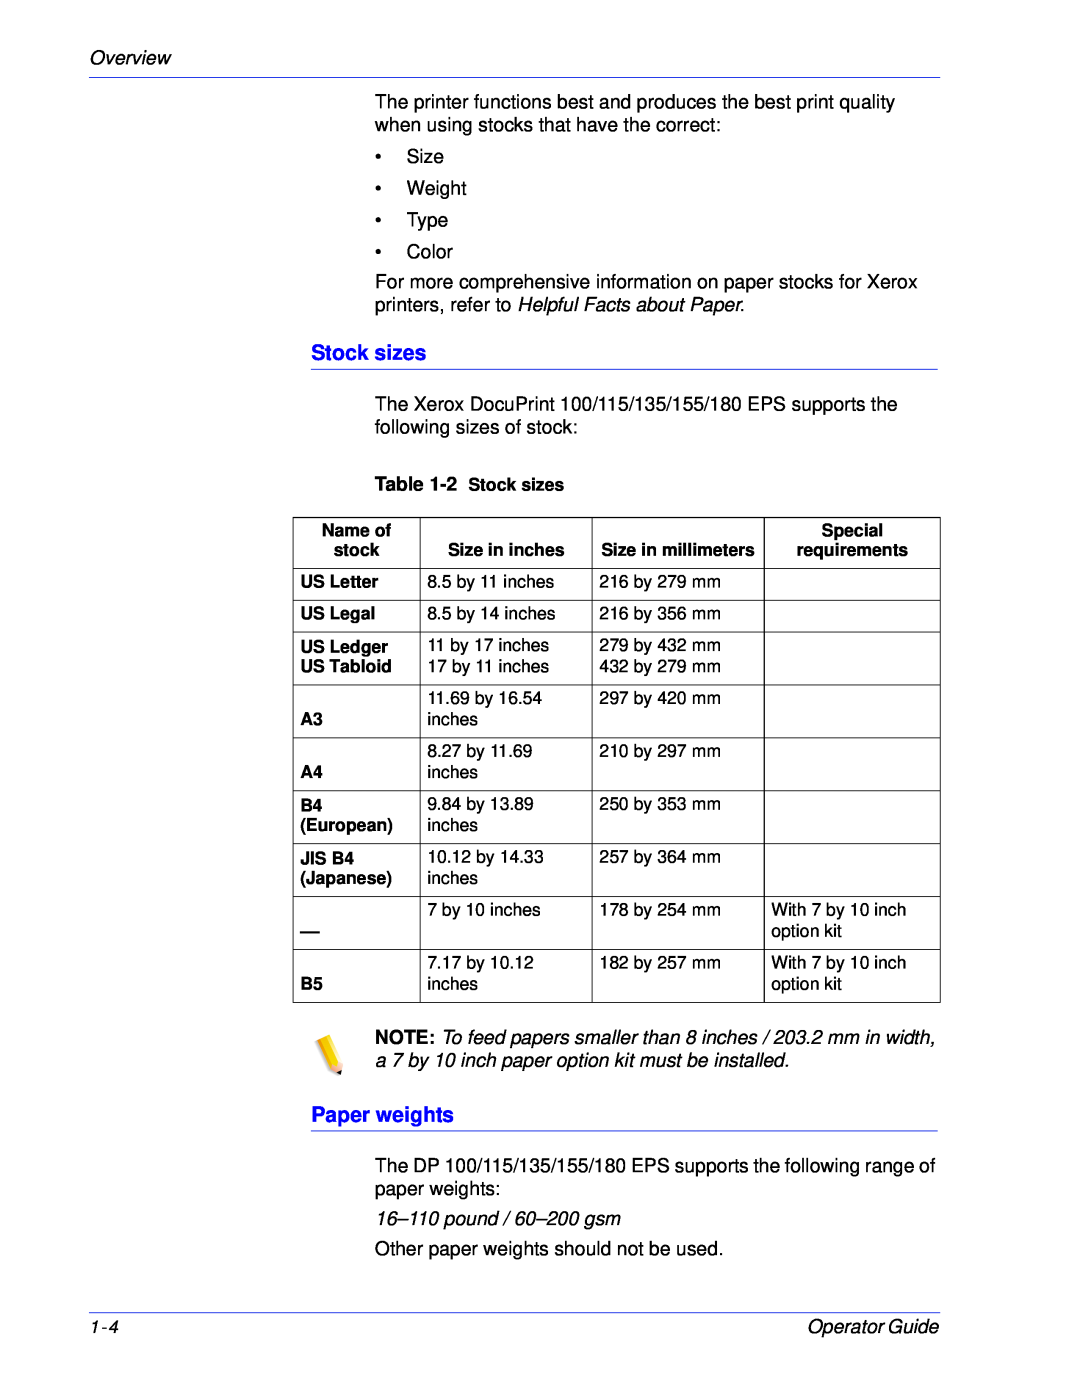 Xerox 100, 180 EPS manual Stock sizes, Paper weights, 16–110pound / 60–200gsm, Overview 